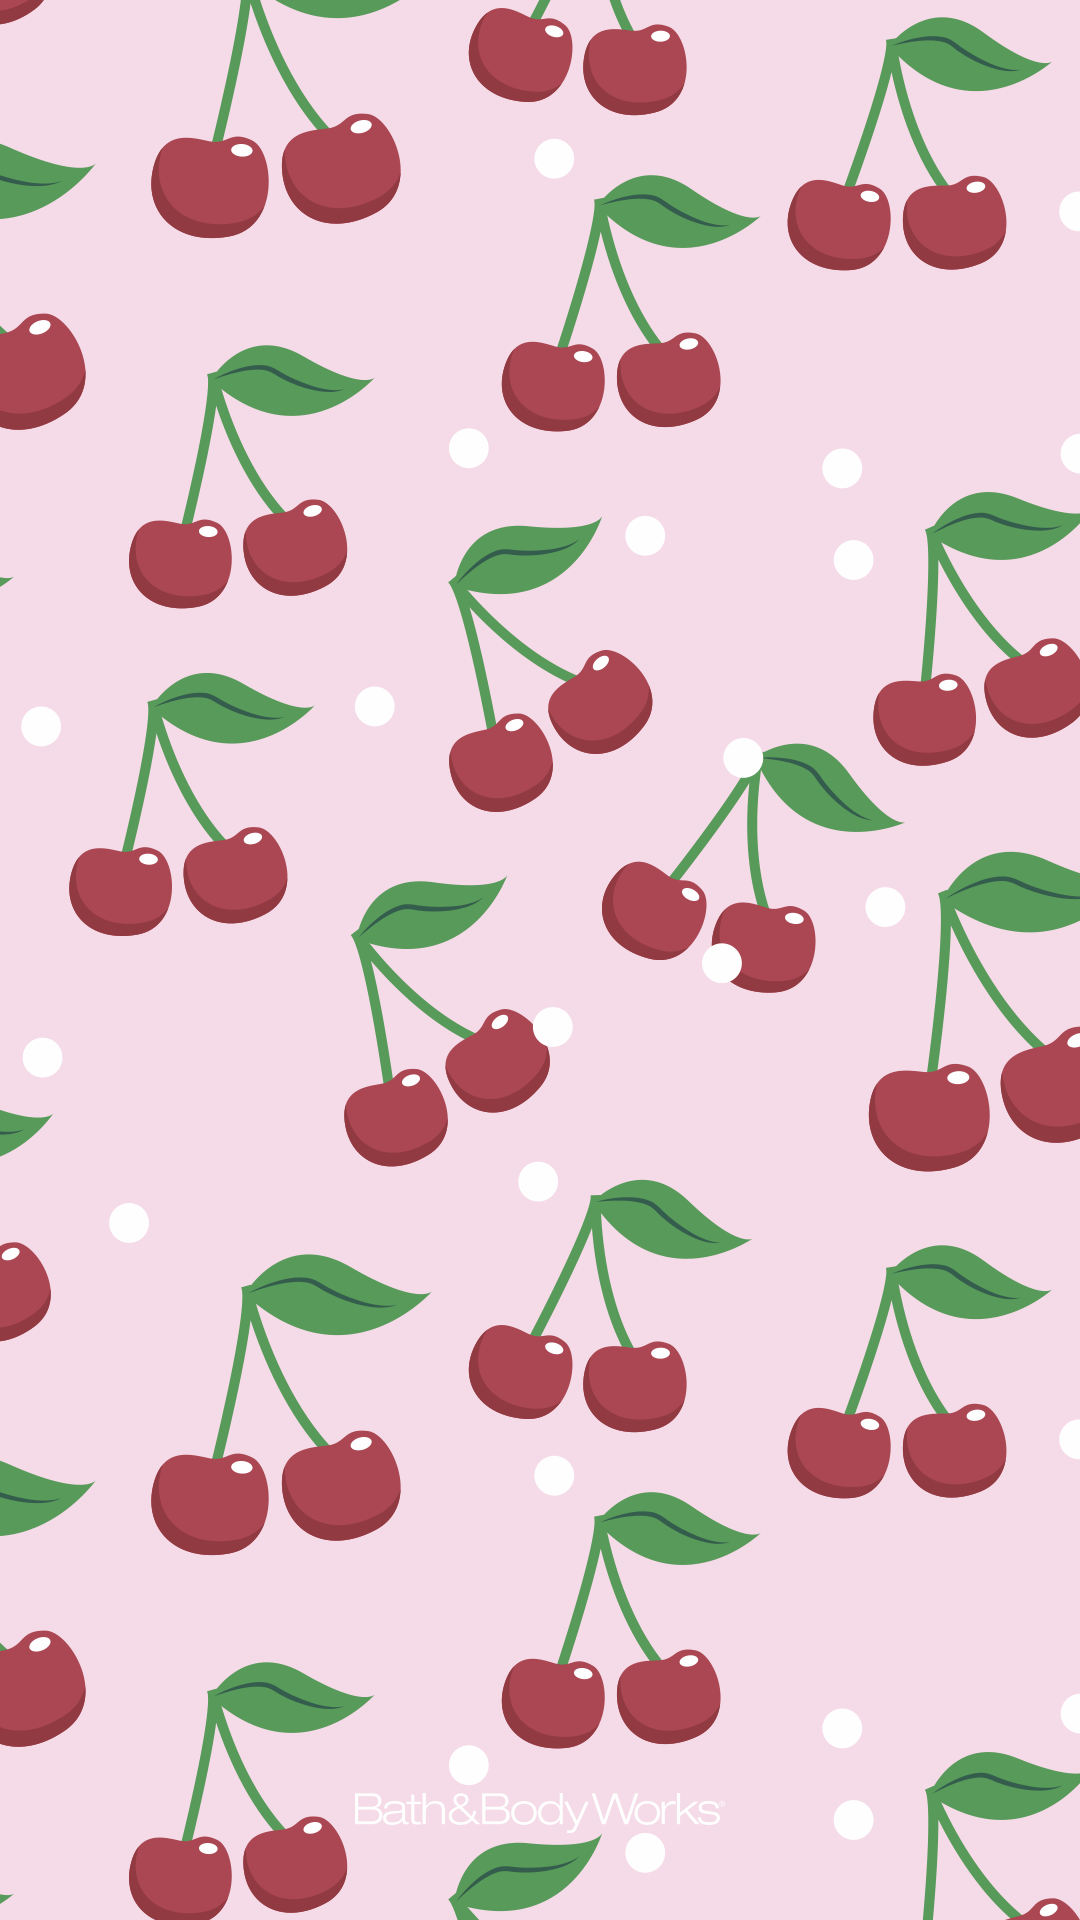 Cherry Images - KoLPaPer - Awesome Free HD Wallpapers